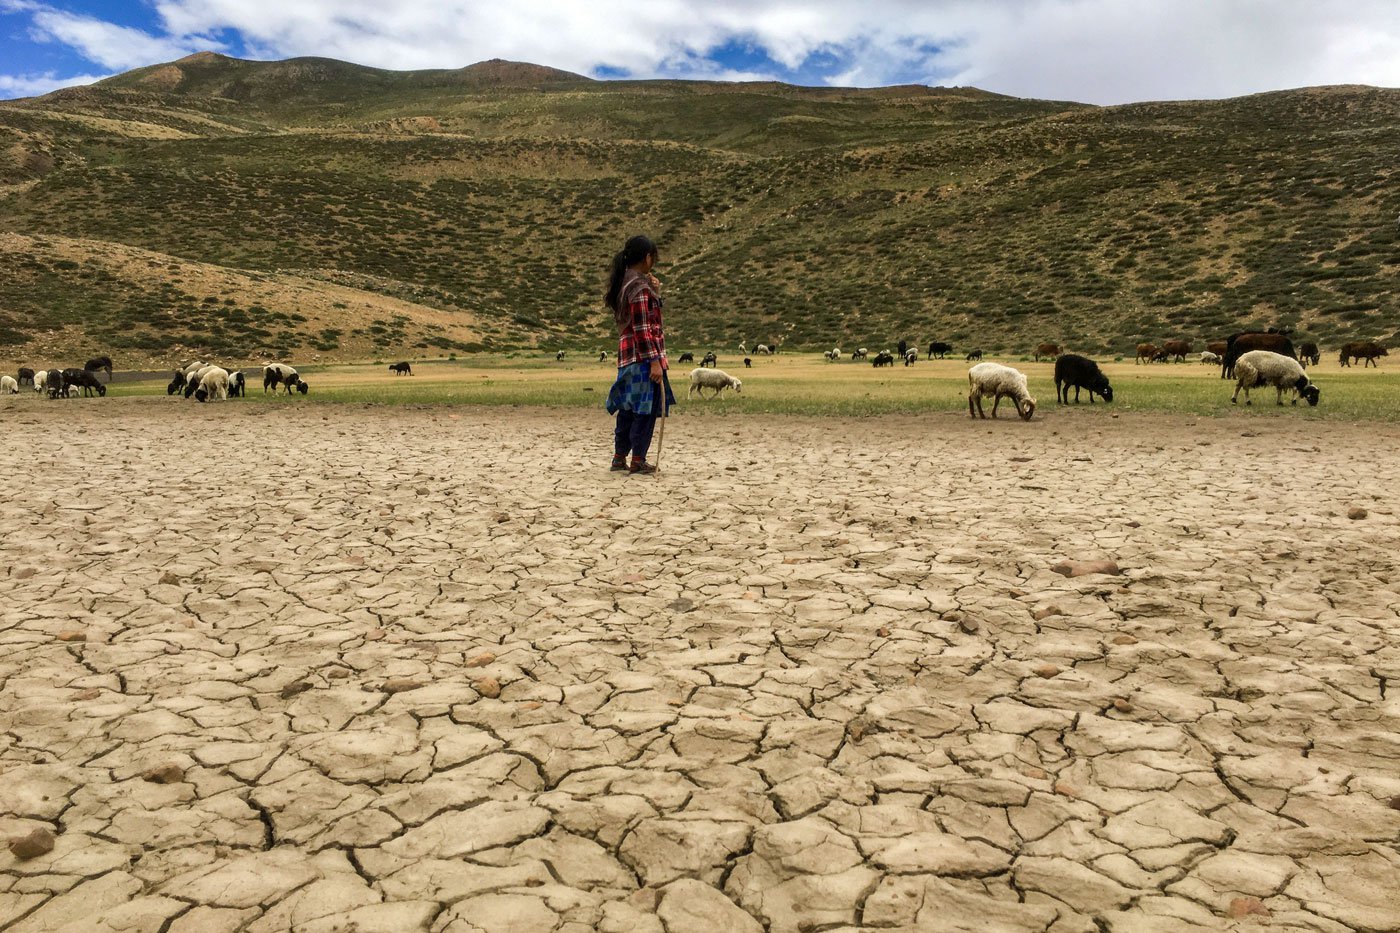 Chhering’s daughter Tanzin Lucky sometimes travels with the animals. “Lack of water causes the earth to dry and crack over time,” said Chhering